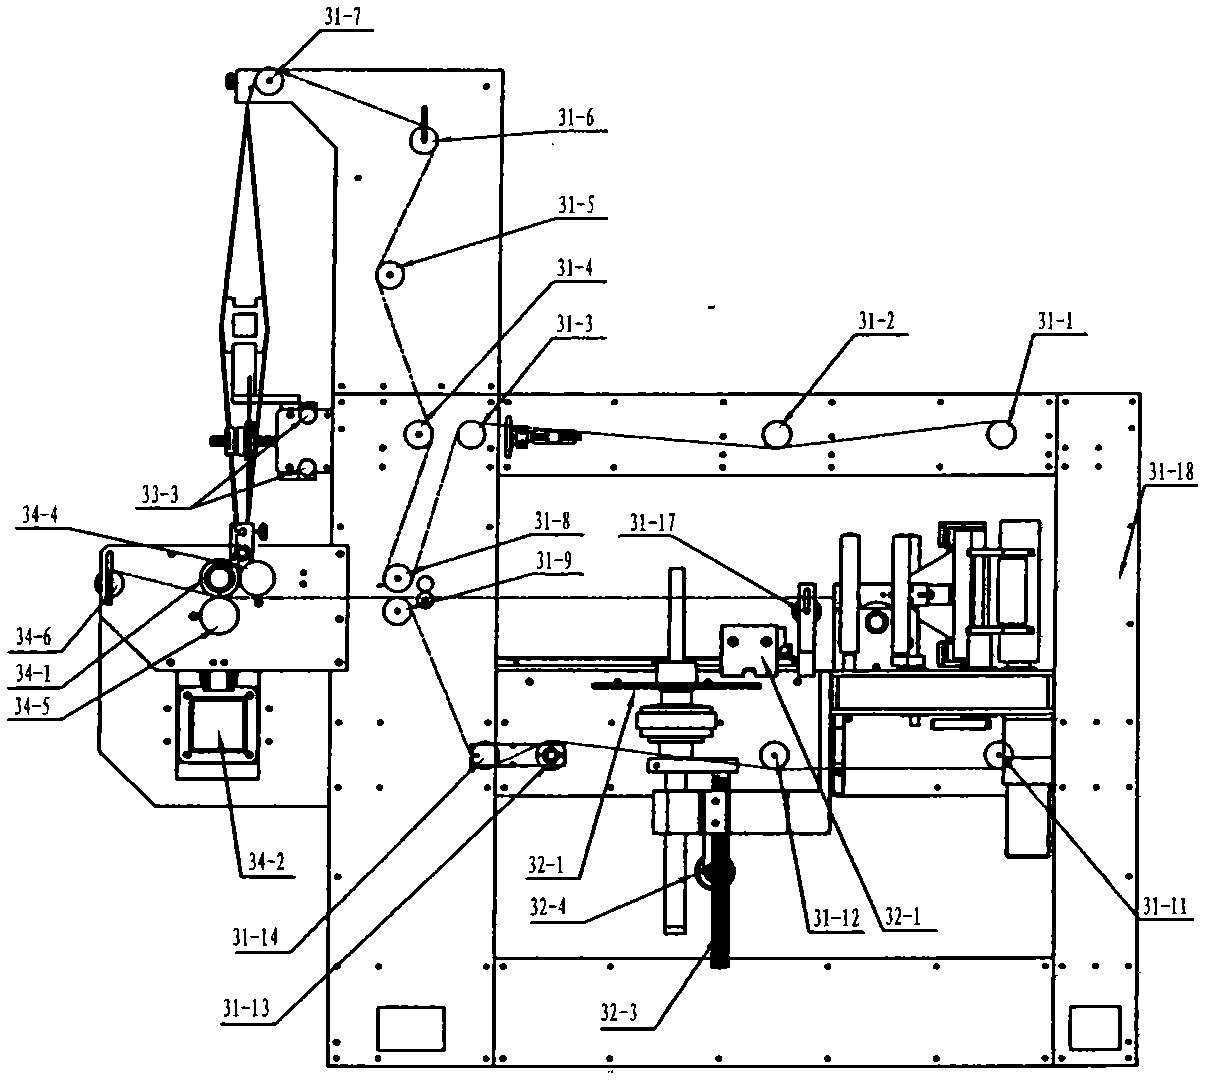 Self-standing device for full-automatic multifunctional multi-system integrated bag-making machine